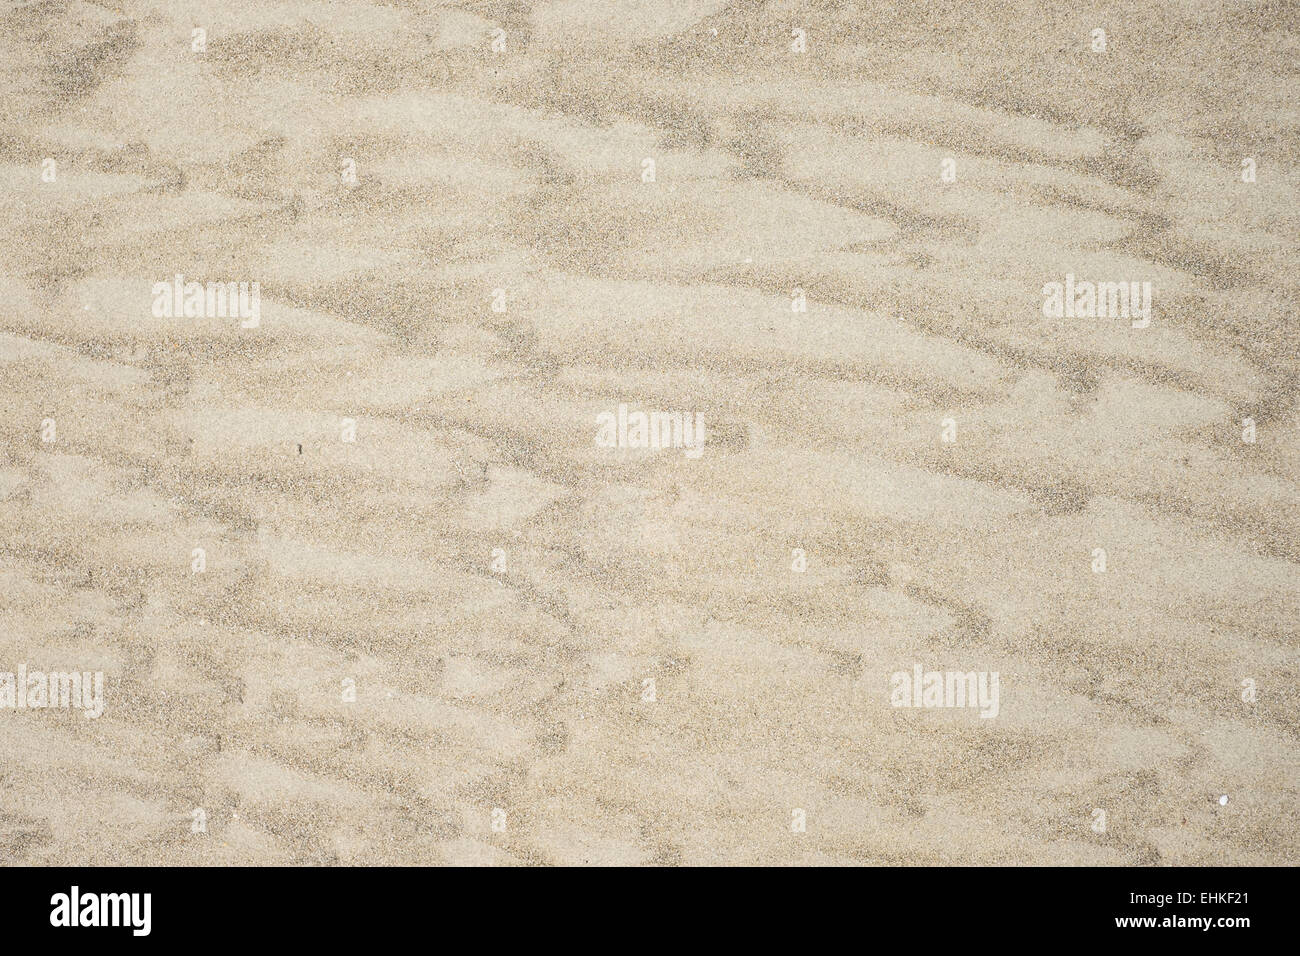 Sand Textures on the Beach, with Patterns Made by the Sea. Stock Photo